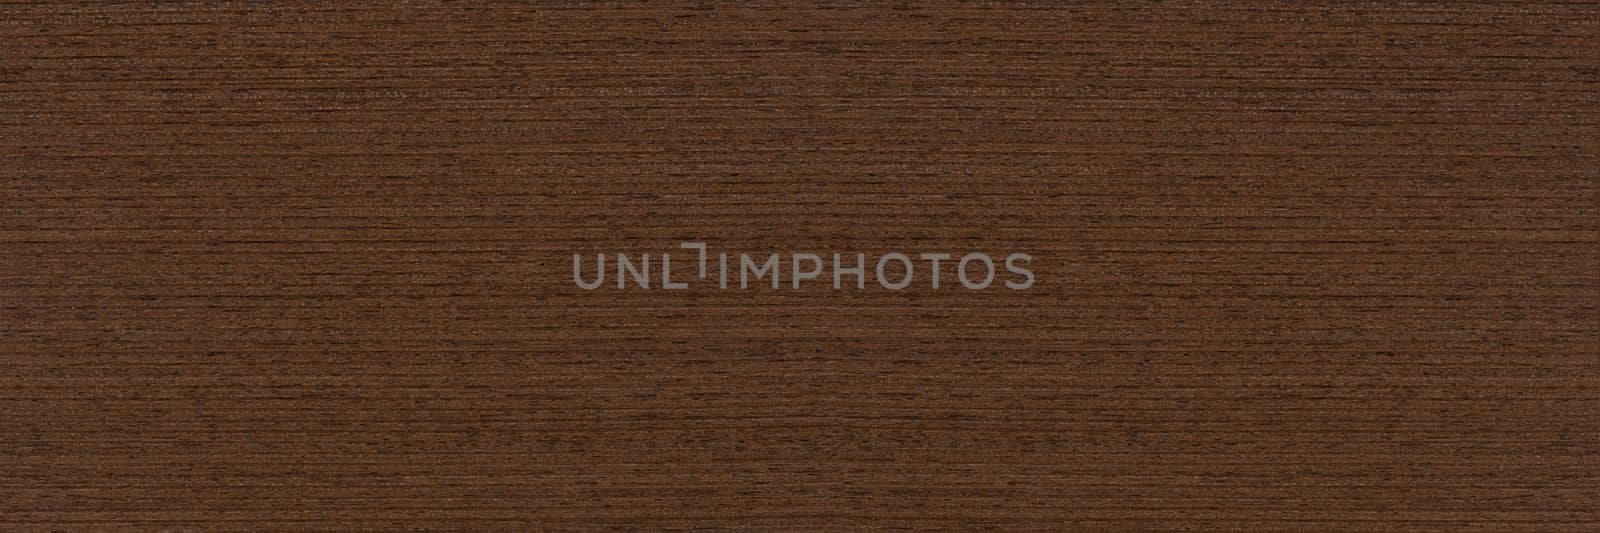 Texture of wenge wood. Dark brown wood for furniture or flooring. Close-up of a Wenge wooden plank, top view